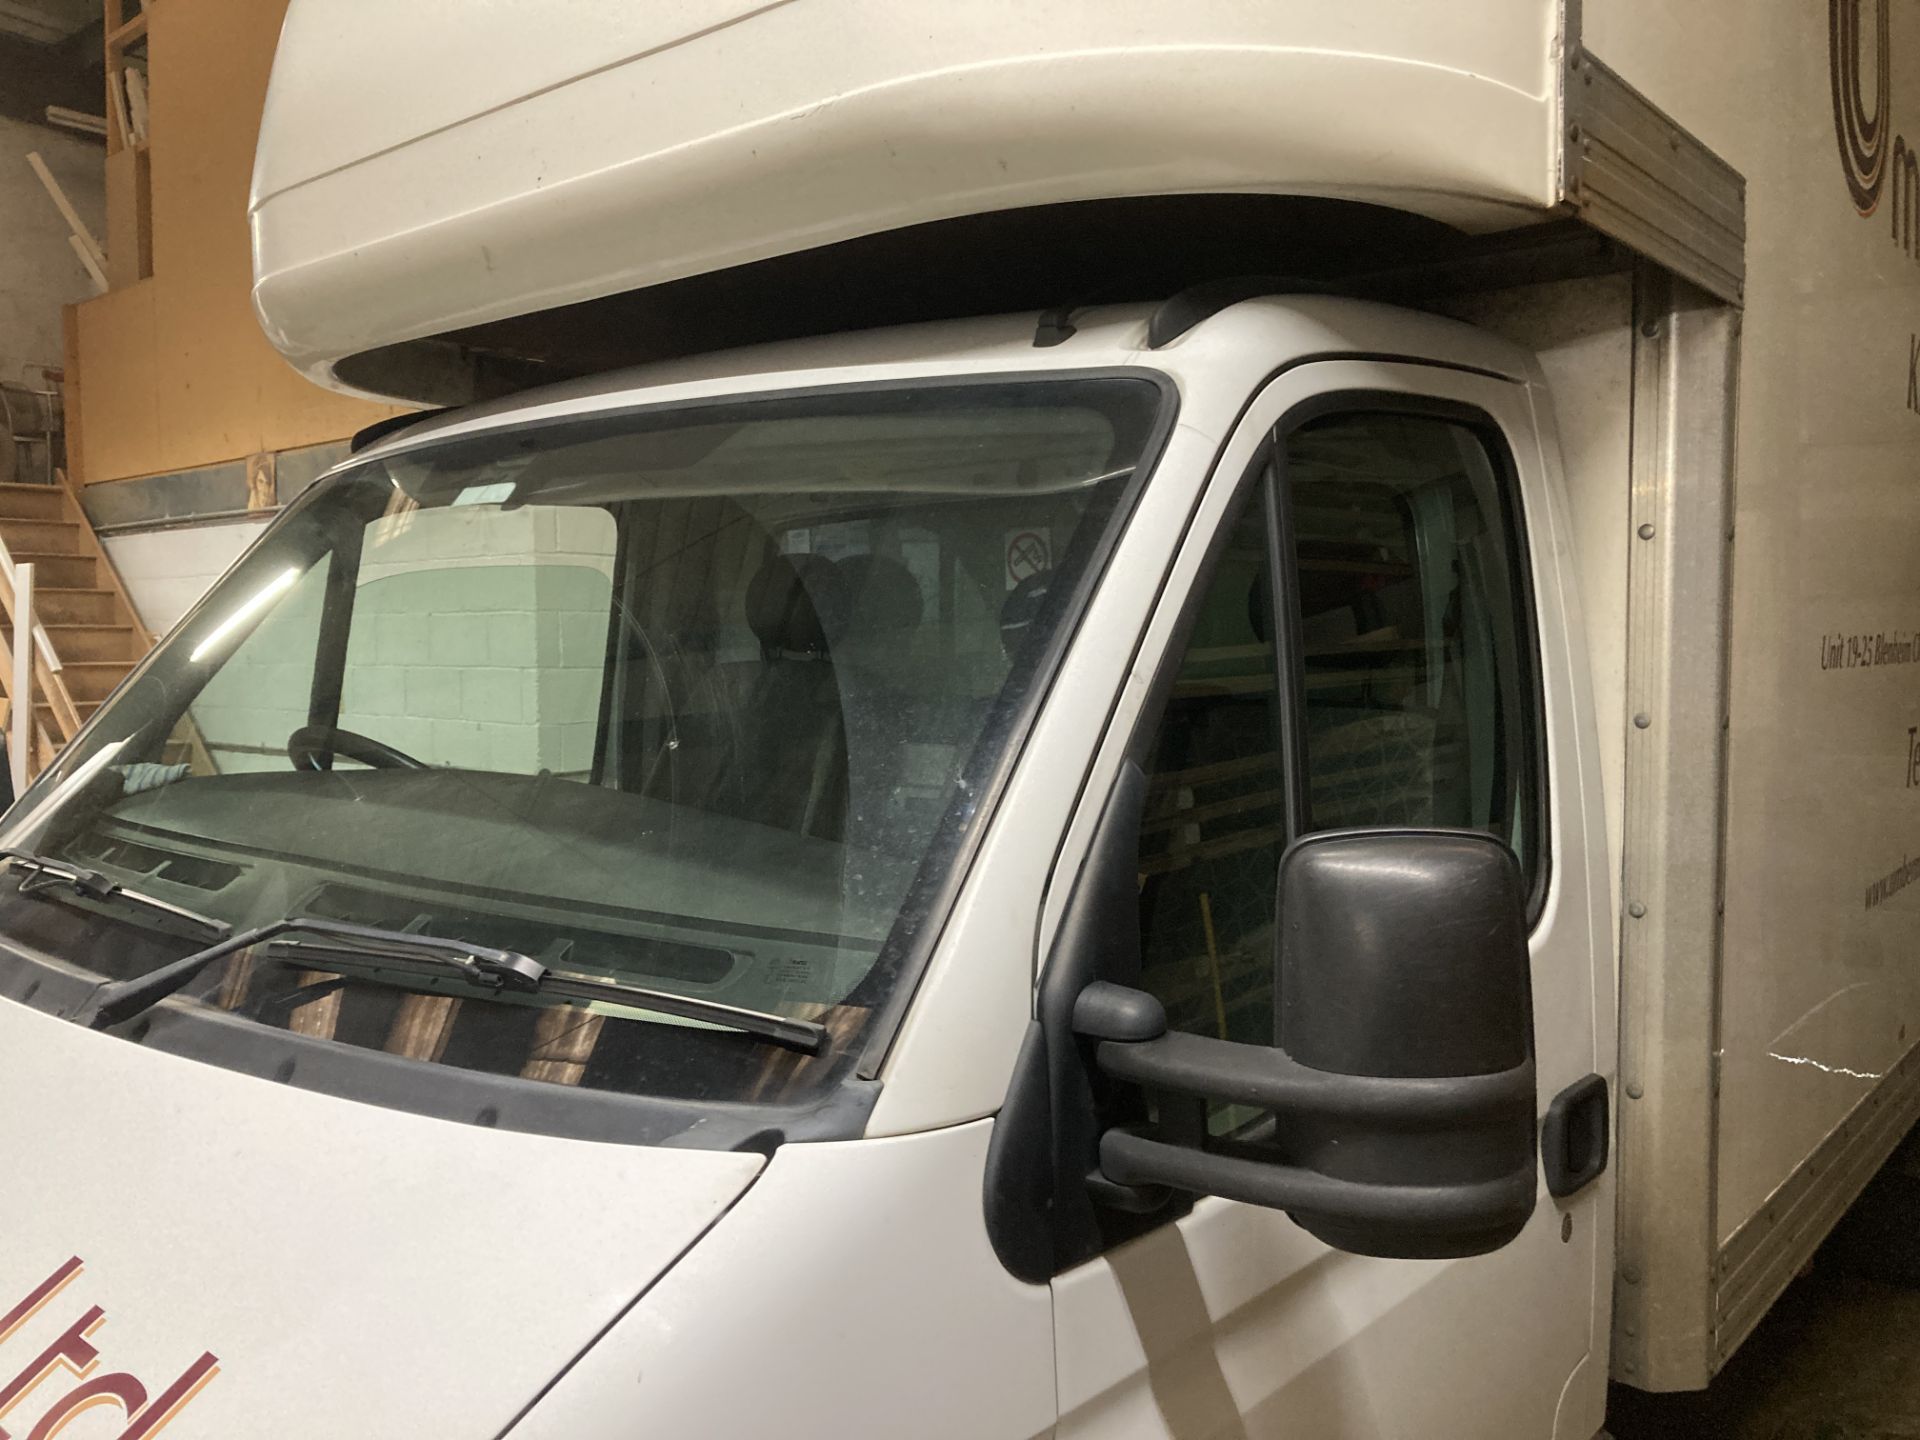 Renault Master 120.35 DCI LWB diesel low roof Luton van registration GN57 AMO with tail lift - Image 28 of 34